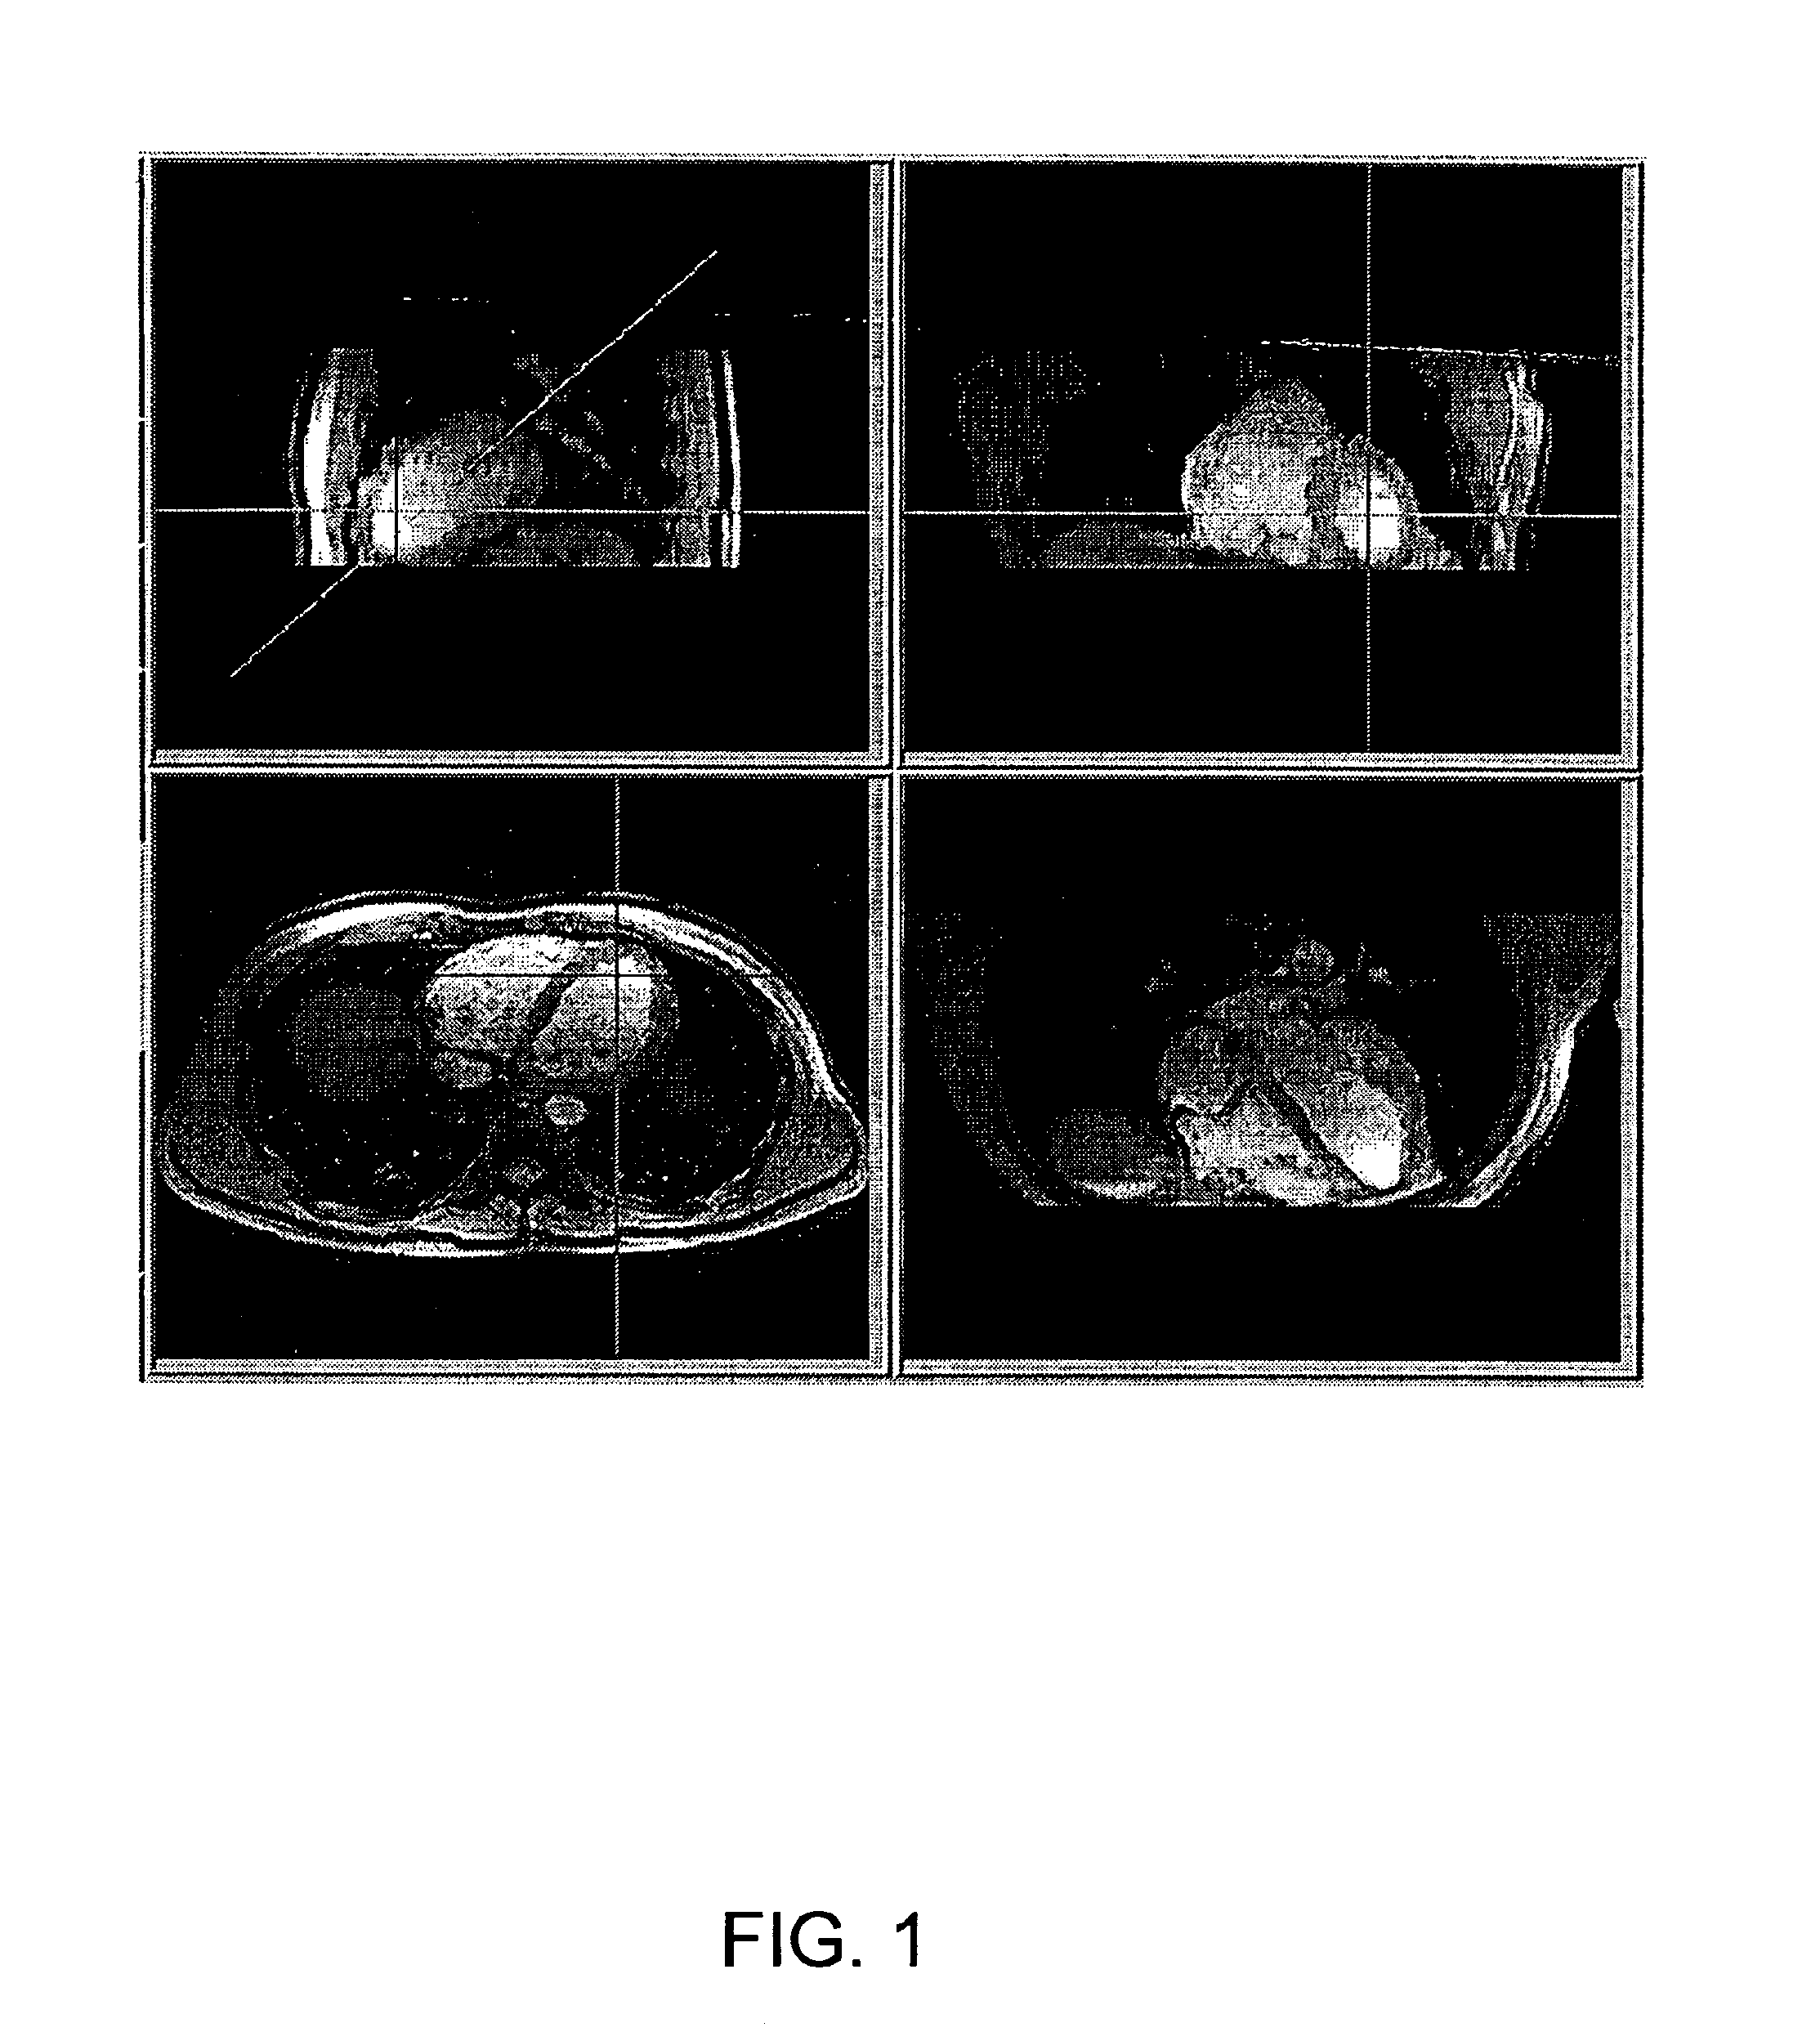 Systems, methods and computer program products for the display and visually driven definition of tomographic image planes in three-dimensional space